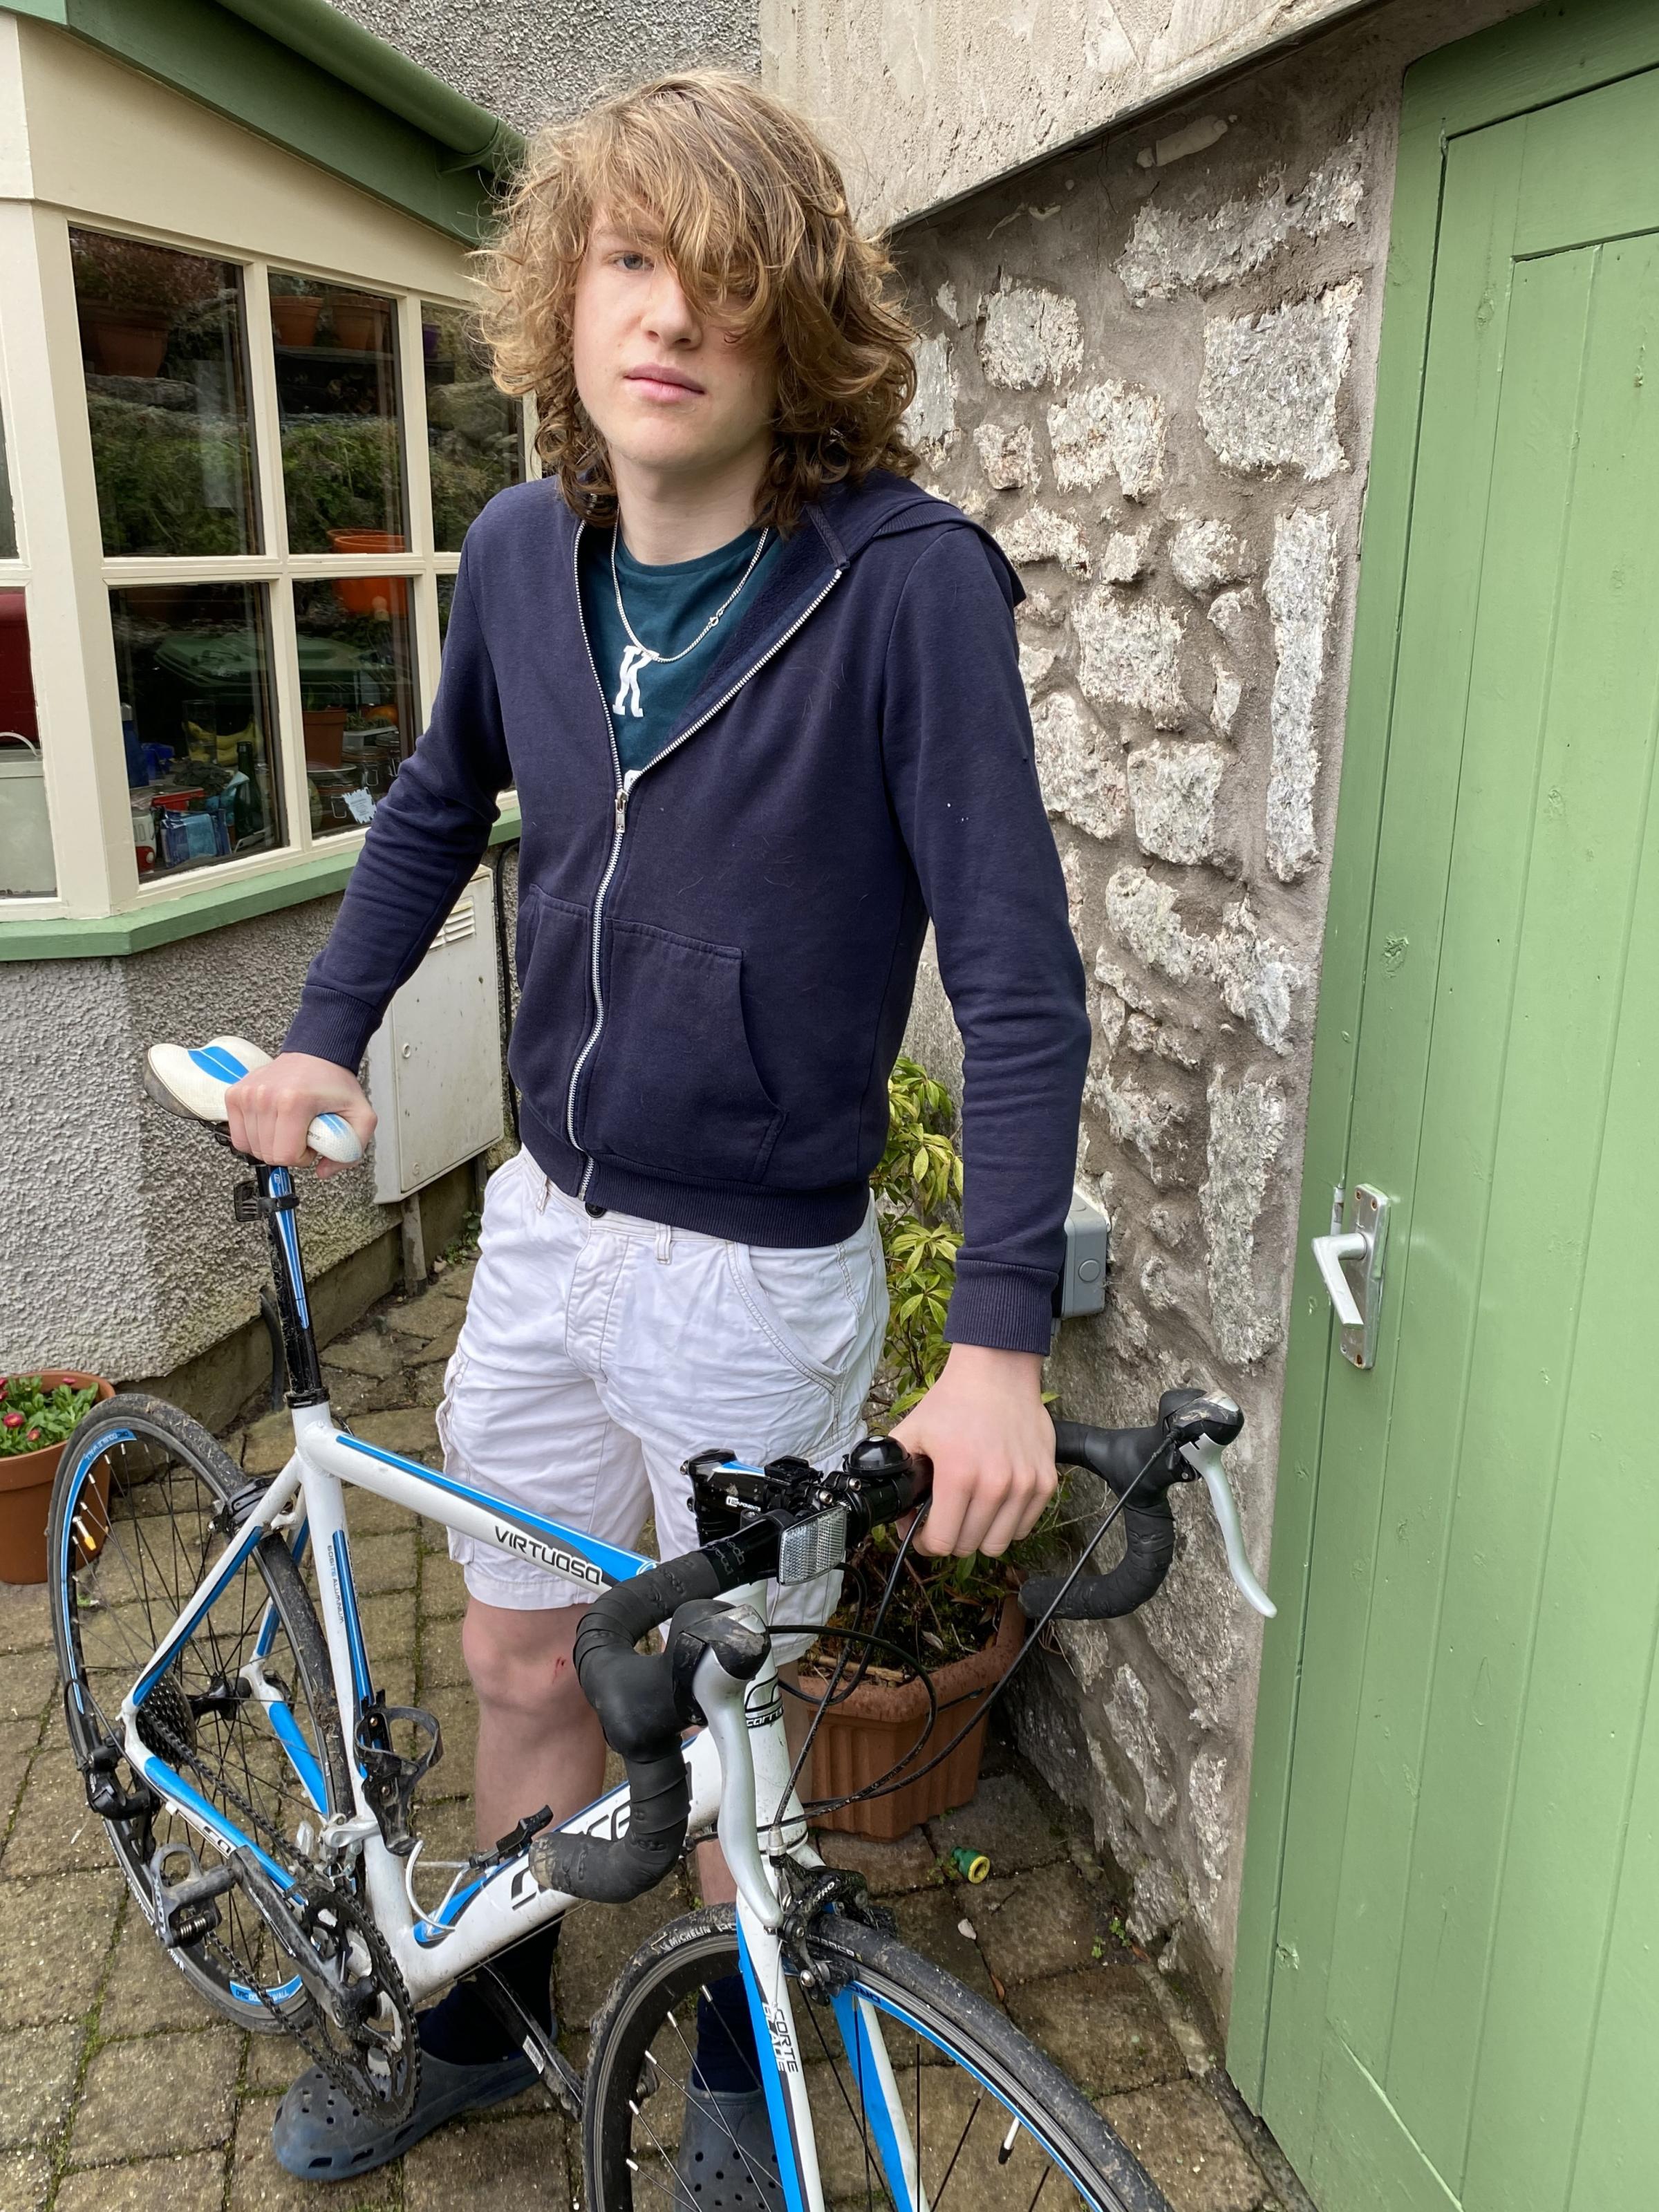 CONCERN: Toby Wheatcroft, 15, was injured while riding his bike after hitting a pothole